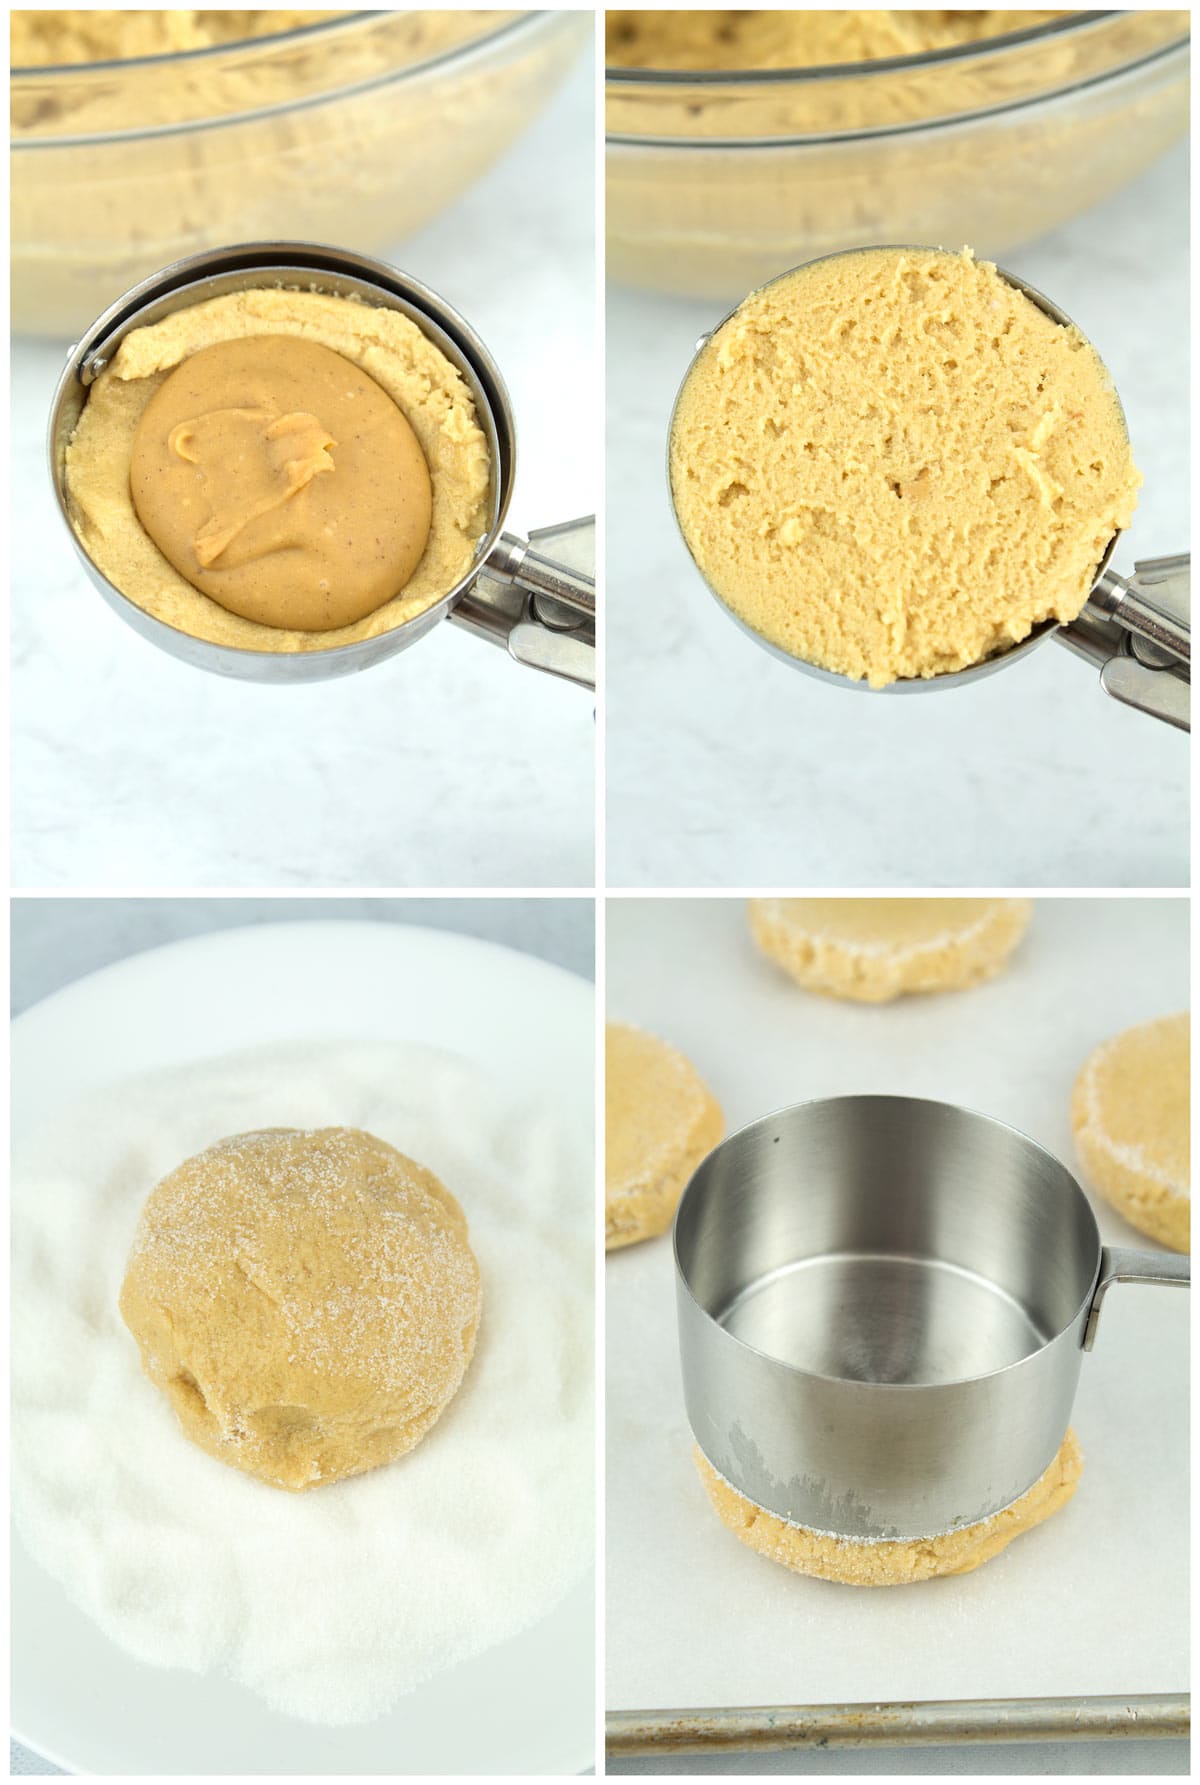 Step-by-step photos showing how to scoop and fill the peanut butter cookies.